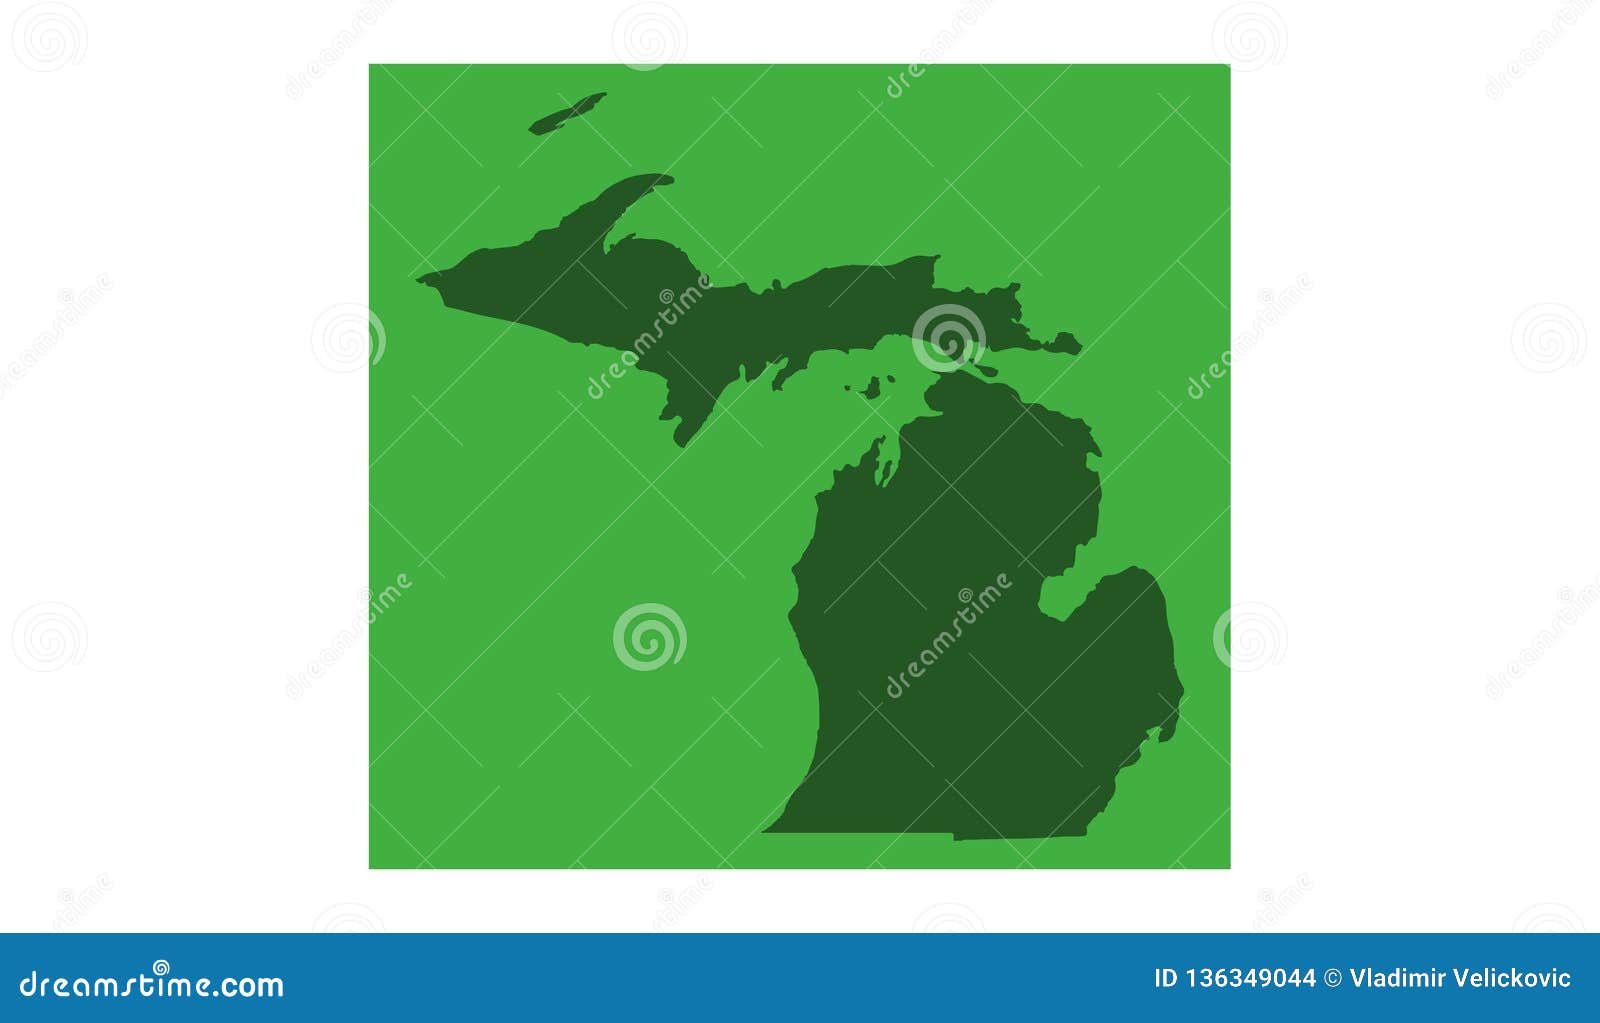 Michigan Map State In Midwestern Regions Of The United States Stock